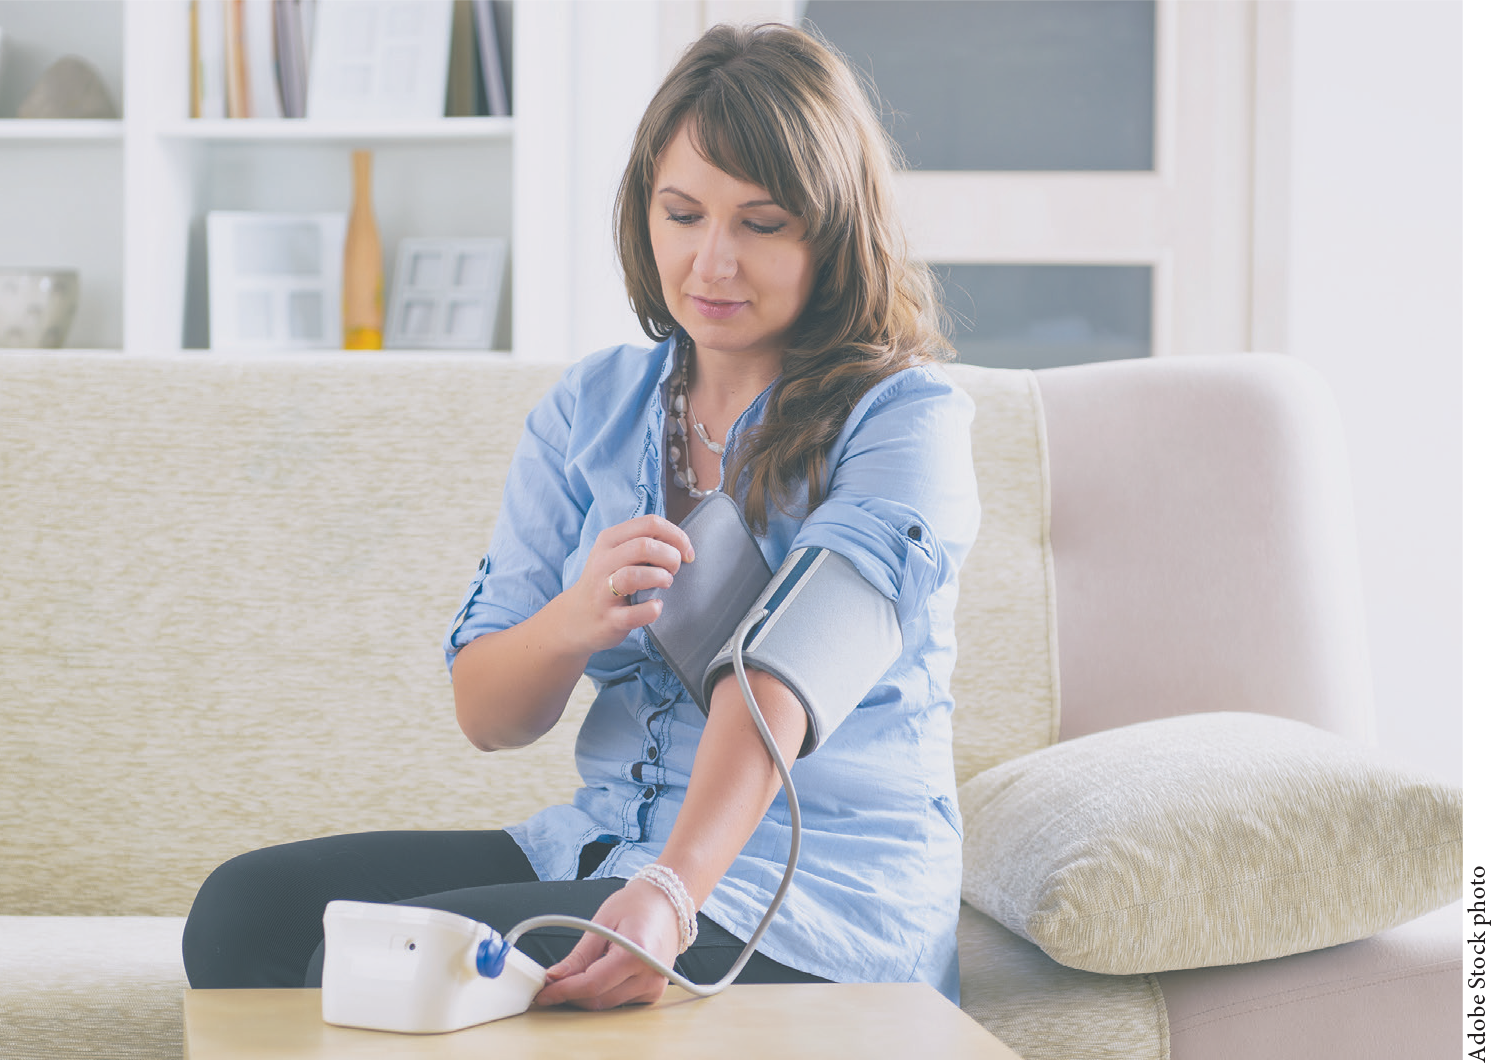 A woman preparing to test her blood pressure in a living room.